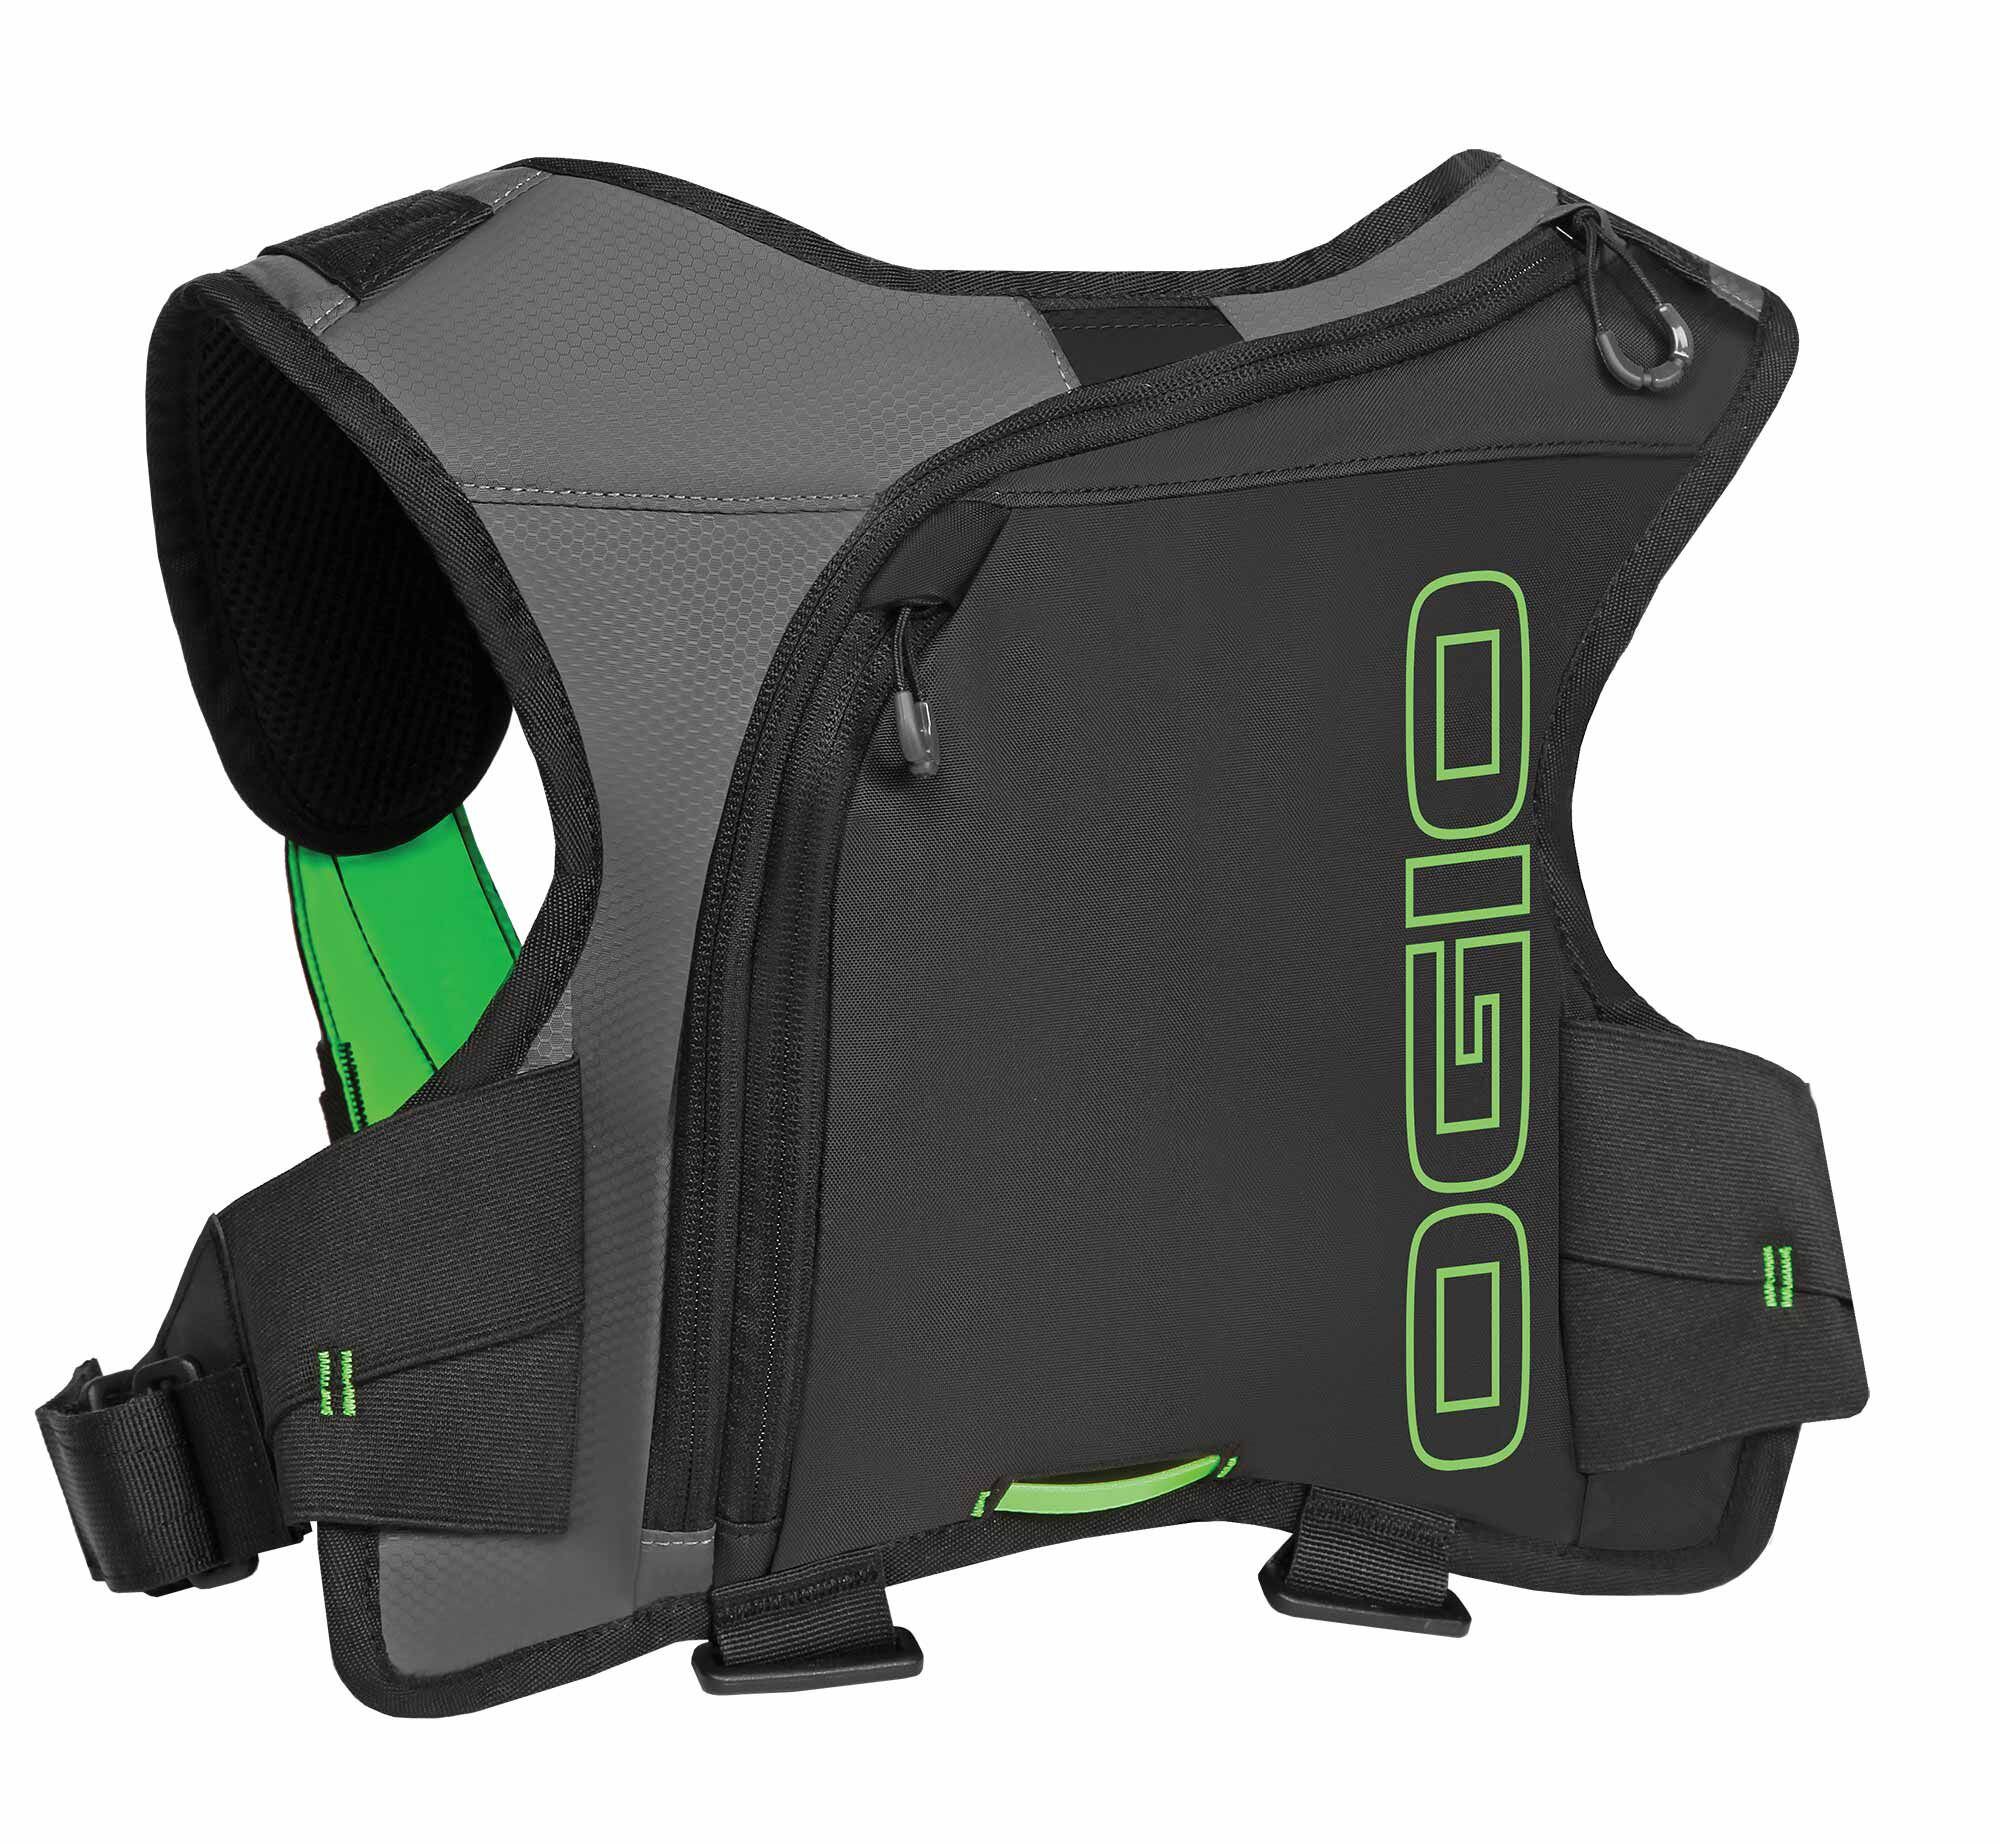 Keep hydrated with the high-quality Ogio Erzberg 1L Hydration Pack.